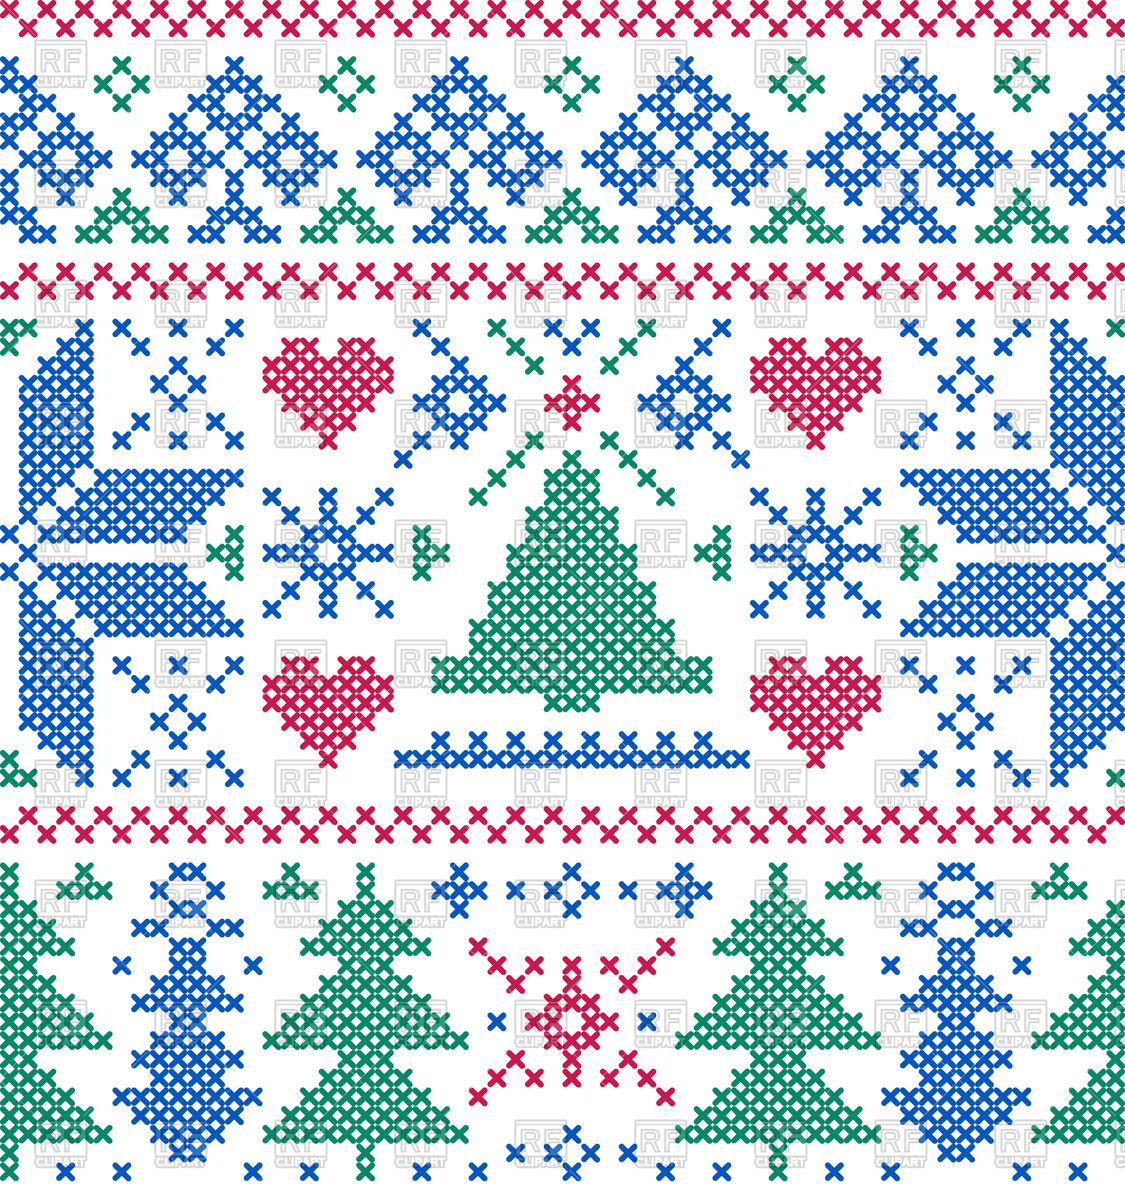 Snowflake Embroidery Pattern Christmas Seamless Embroidery Pattern With Trees And Snowflakes Stock Vector Image